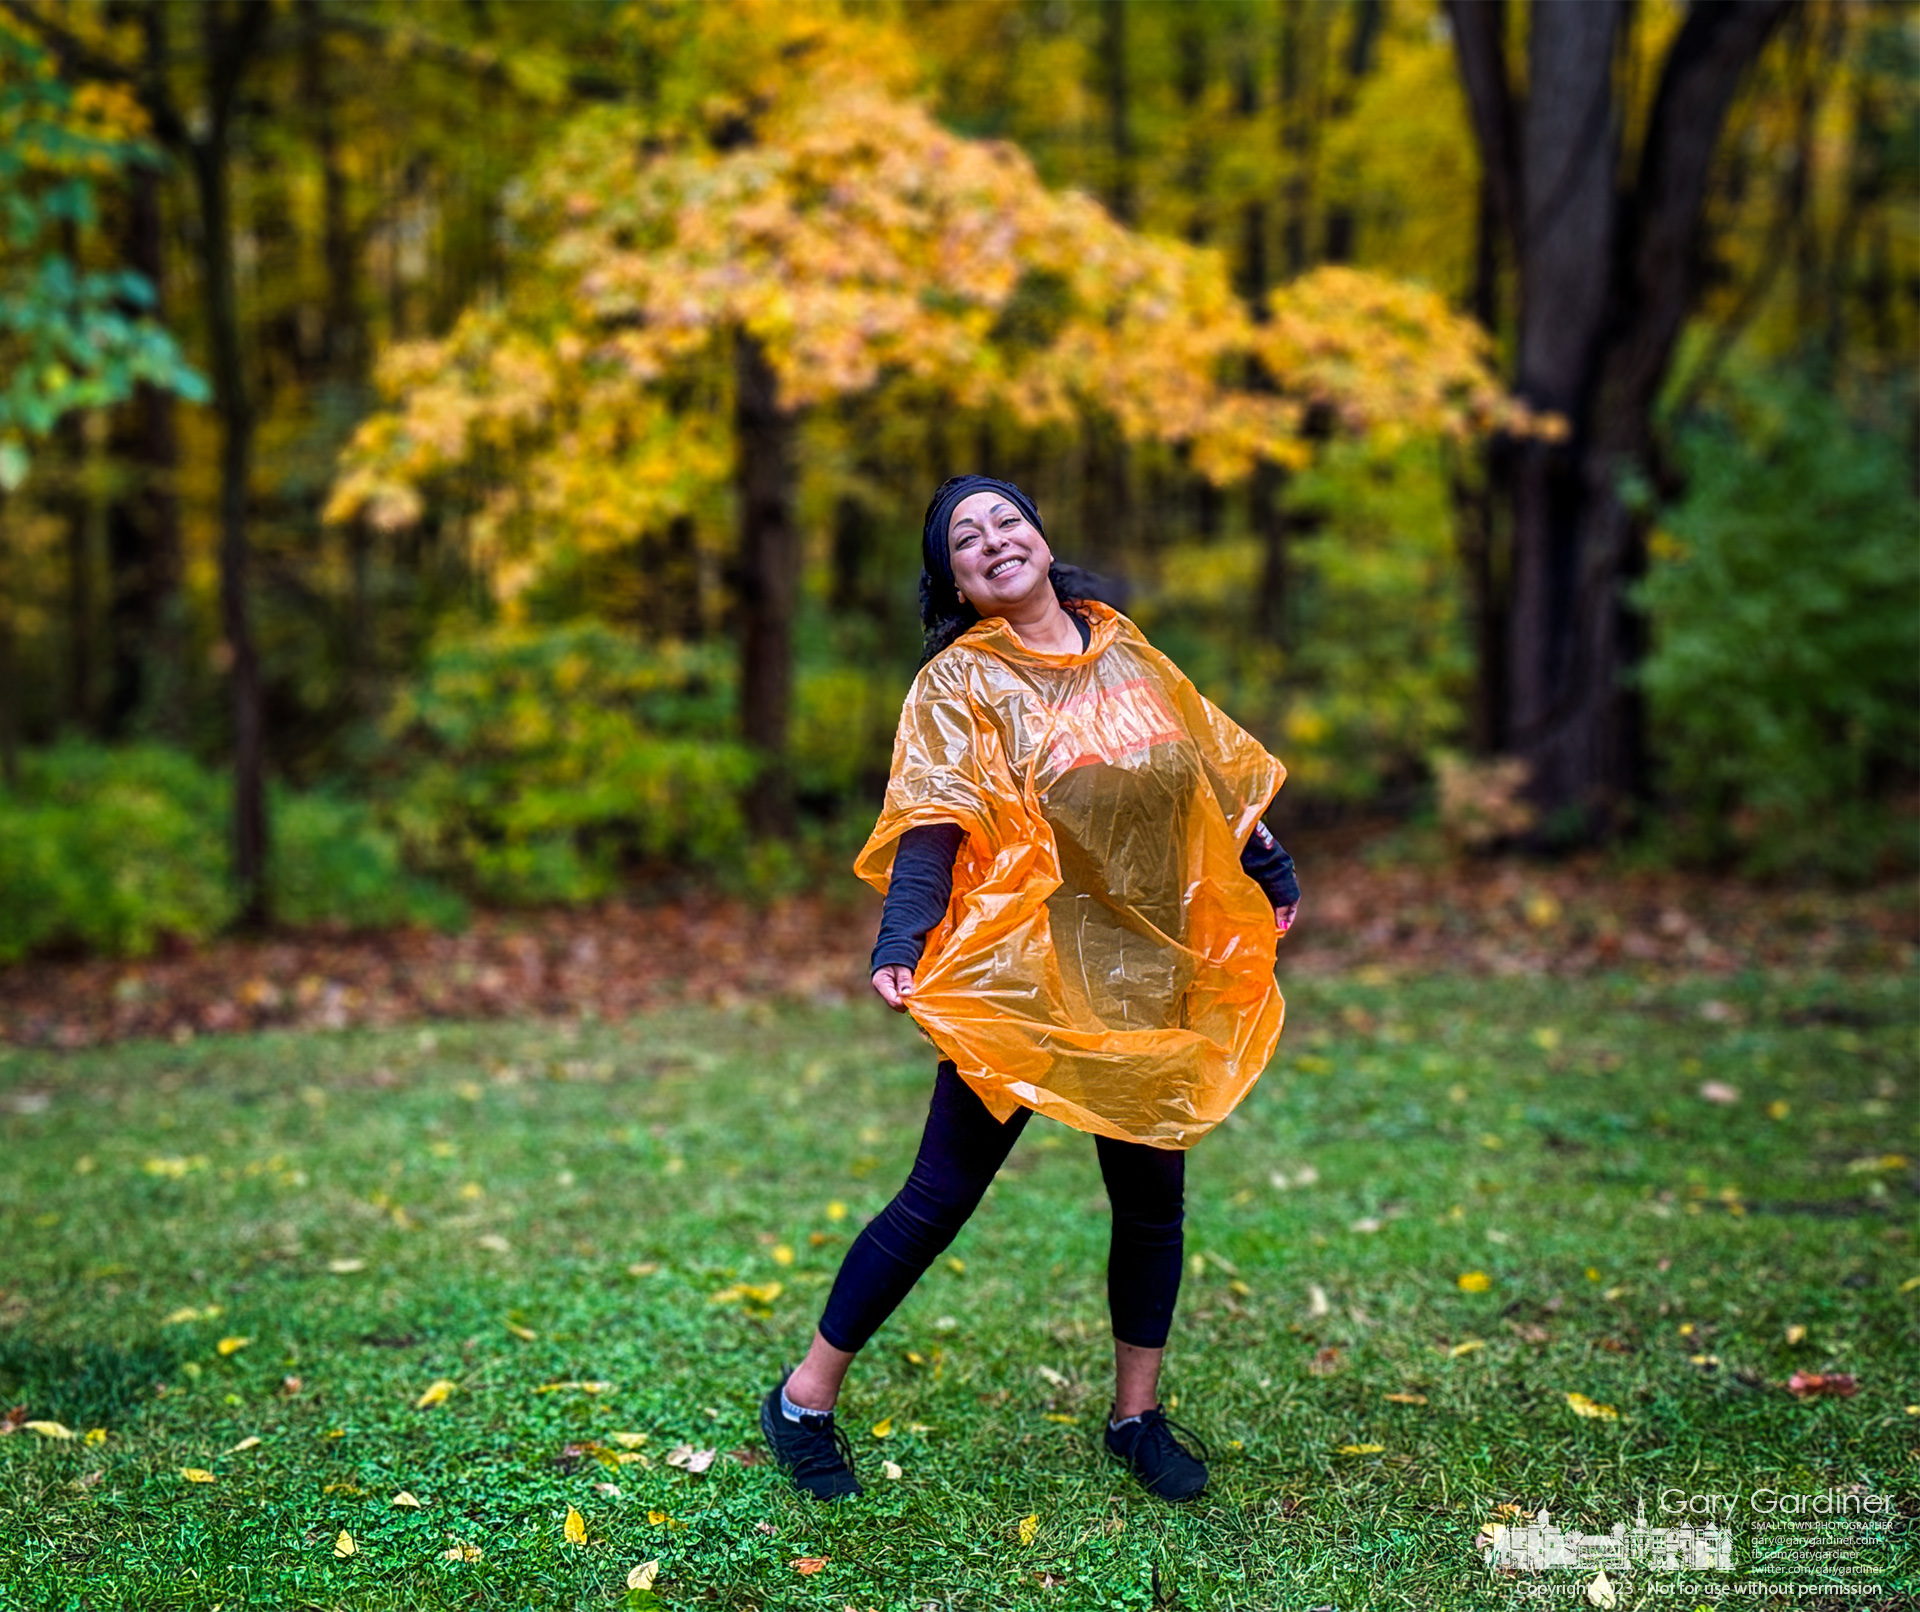 Jackie, the mother of a third-grader on a field trip to Inniswood, laughs as she shows off the pumpkin-colored rain poncho she wears that she is convinced embarrassed her child. My Final Photo for October 20, 2023. 